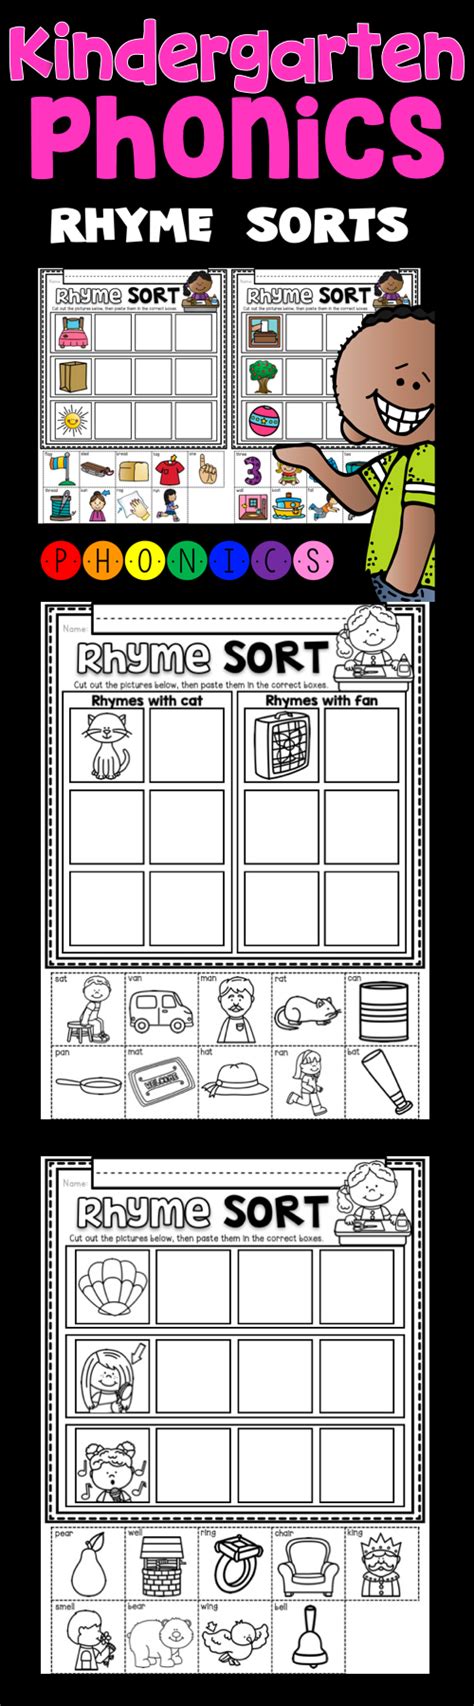 In this series, readers are tested on their ability to perform interpretations, make deductions, and infer the meaning of vocabulary words based on an. Rhyme Sorts ~ Introductory Phonics and Pre-Reading Skills ~ Rhyming Printables | Phonics ...